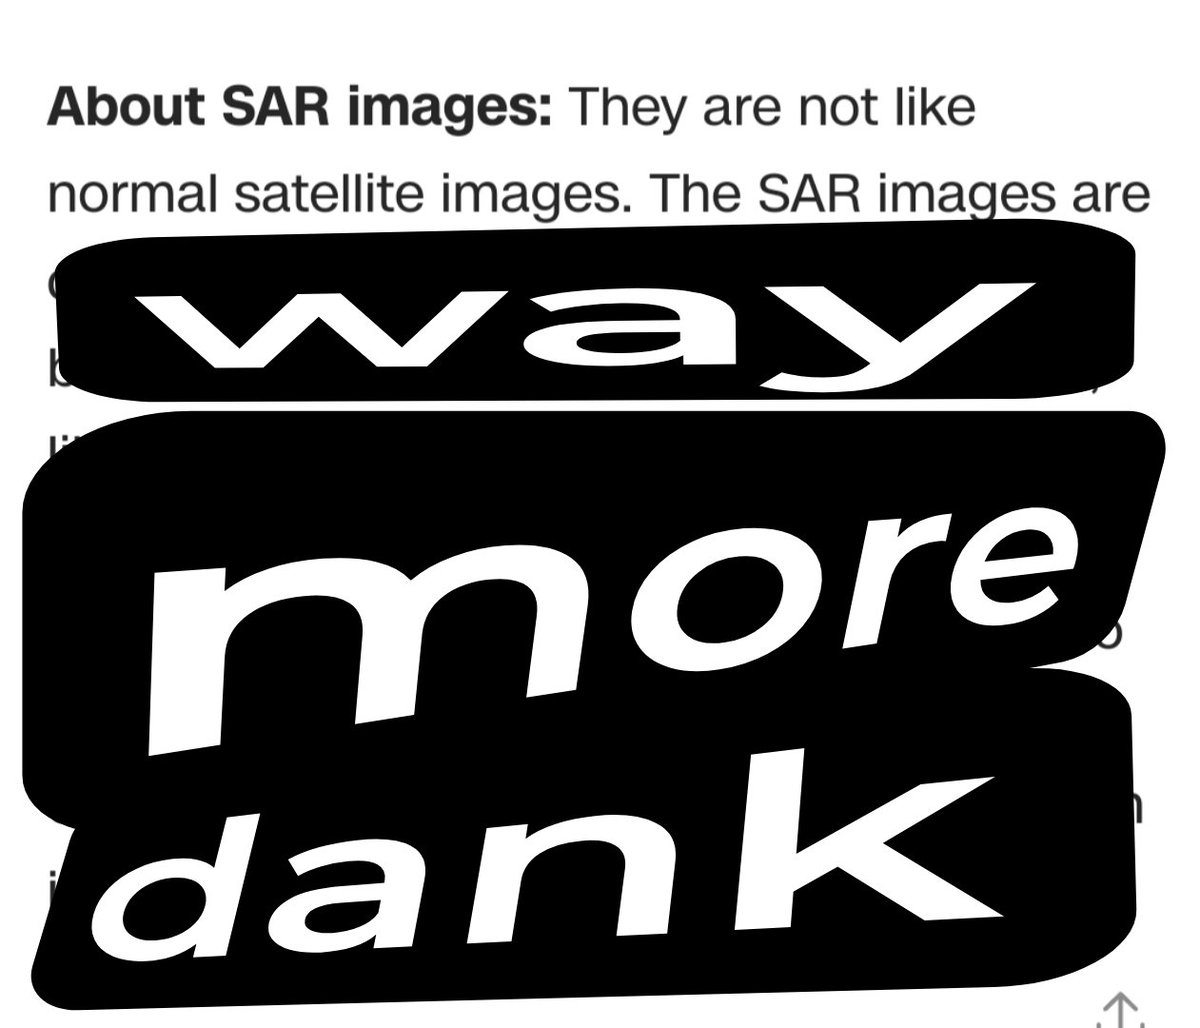 Correcting a minor omission from a CNN explainer on SAR